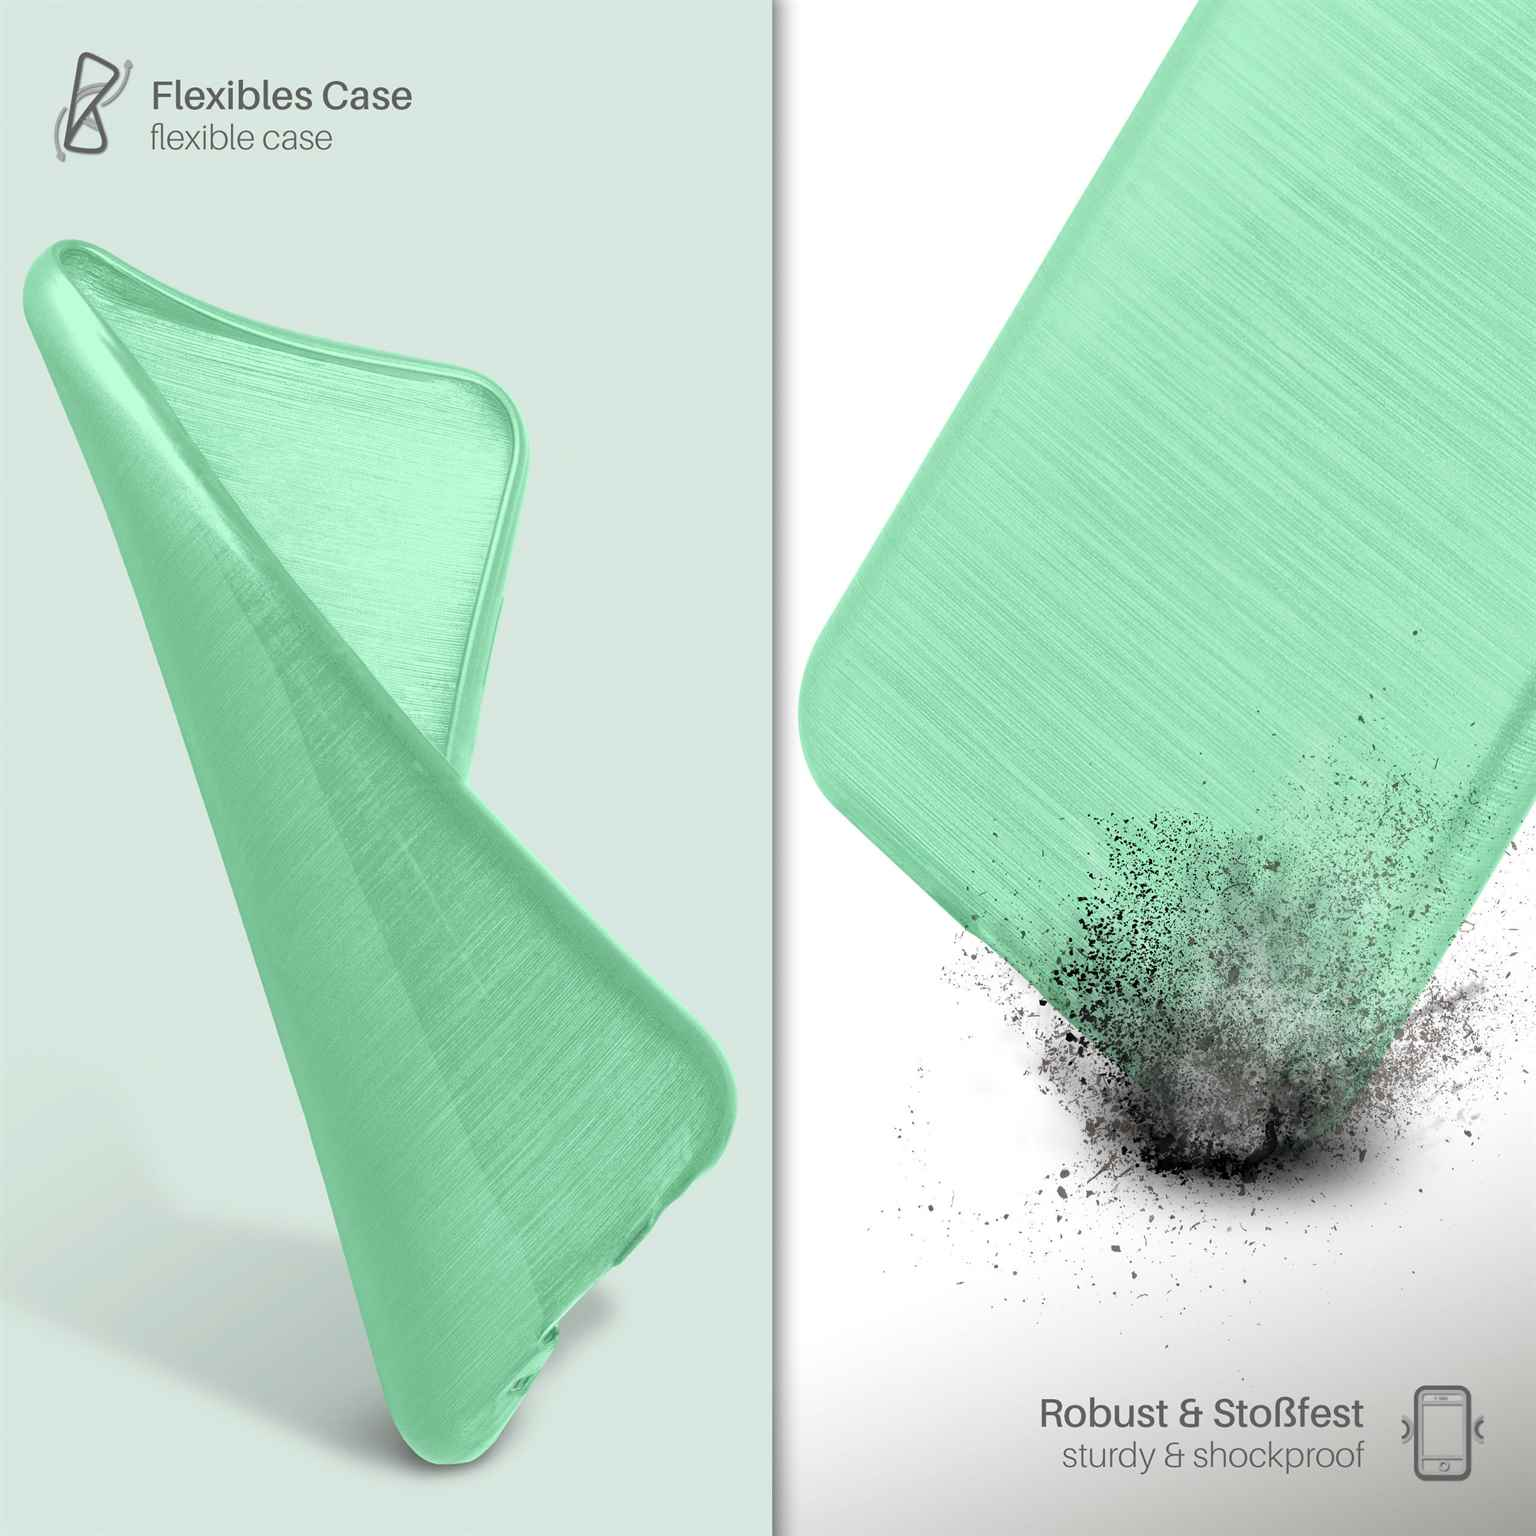 Galaxy S4, Samsung, Mint-Green Backcover, Case, Brushed MOEX